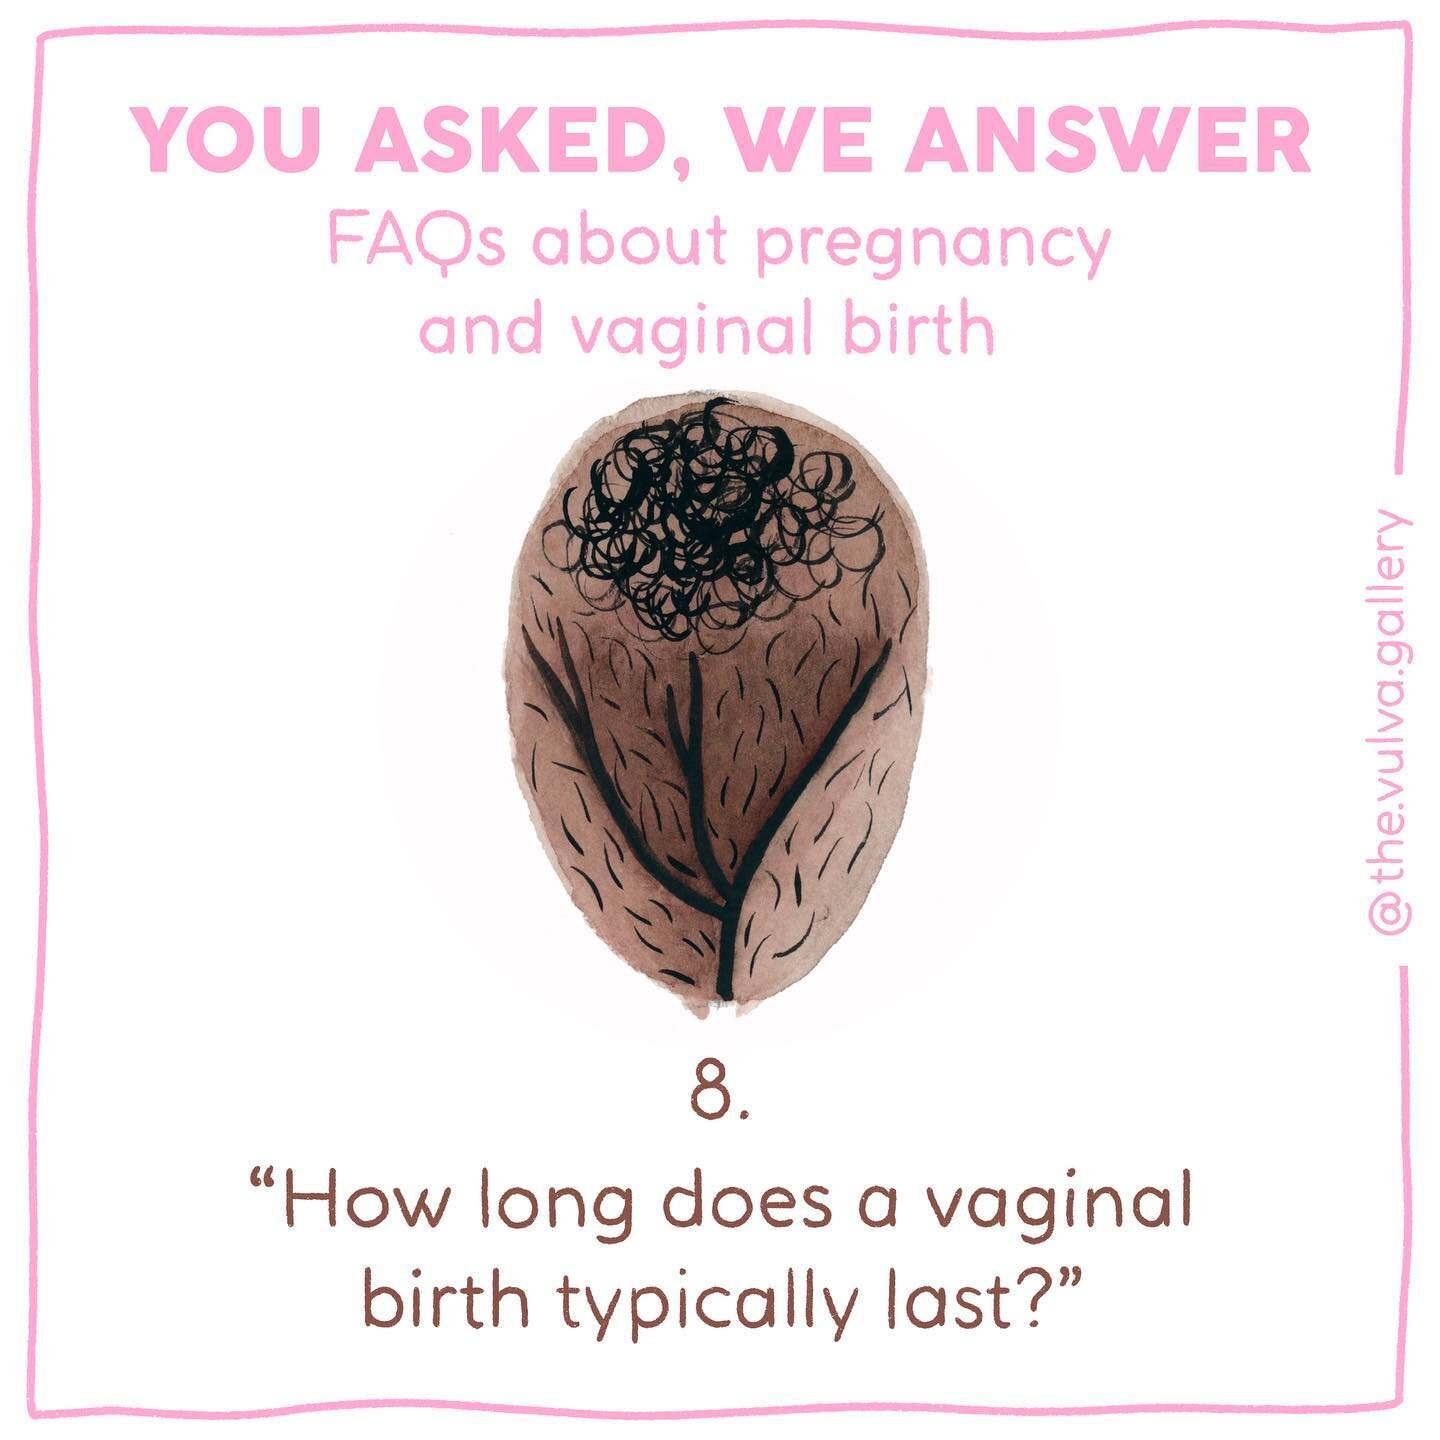 Hi all! During January we&rsquo;ve been answering a bunch of FAQs about Pregnancy and Vaginal Birth - but there were too many questions to answer in one month. As I still wanted to share all of them close to January, here&rsquo;s a post with question